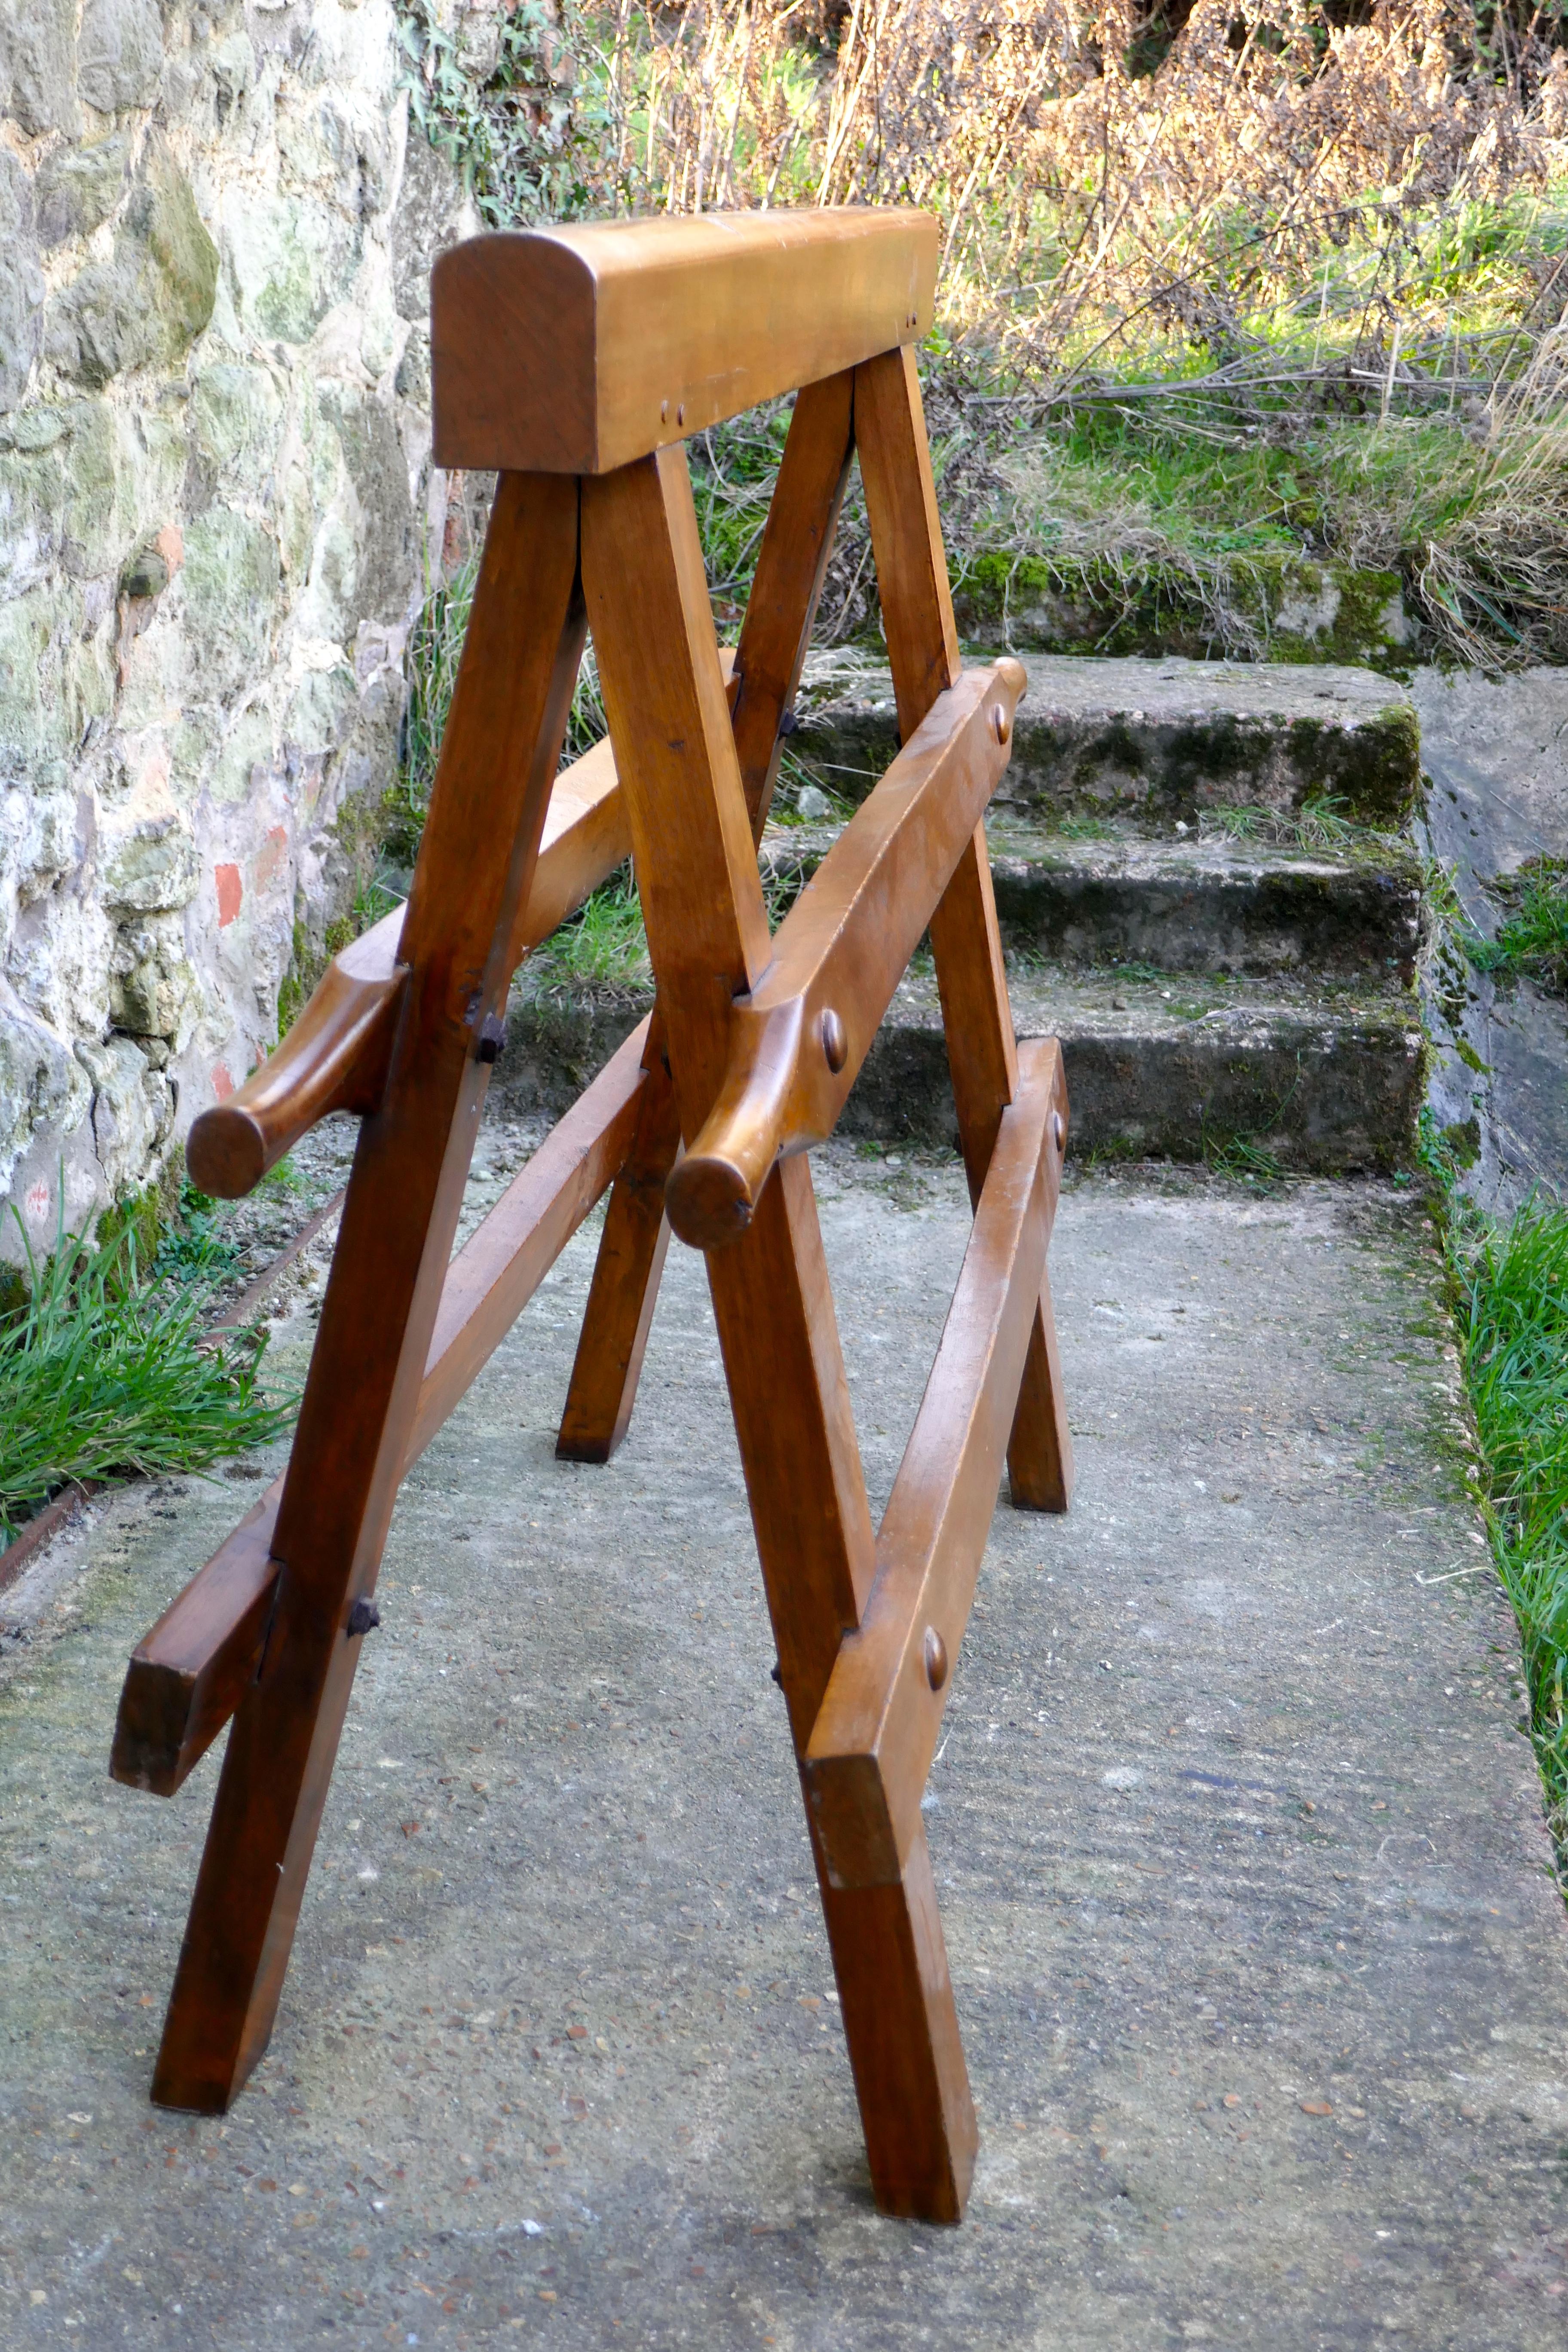 Heavy 19th century saddle rack

The saddle stand or rack is all in original finish, it has extended centre rails which can be used to lift the heavy rack, a good stable piece as a saddle rack or perhaps it would work very well as an unusual